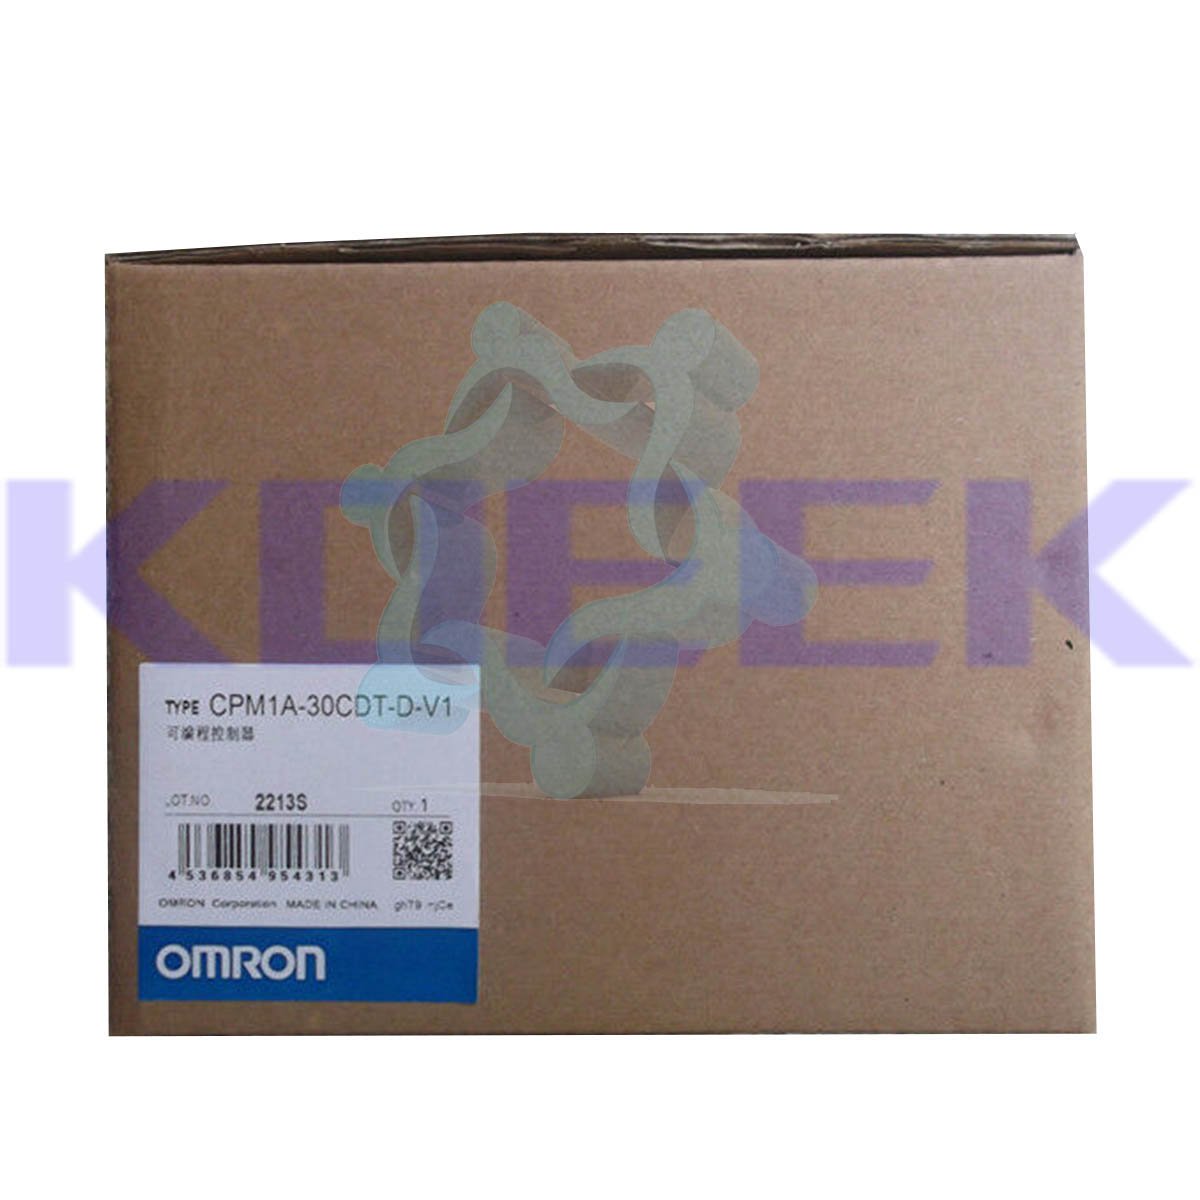 CPM1A-30CDT1-D-V1 KOEED 201-500, 80%, import_2020_10_10_031751, Omron, Other